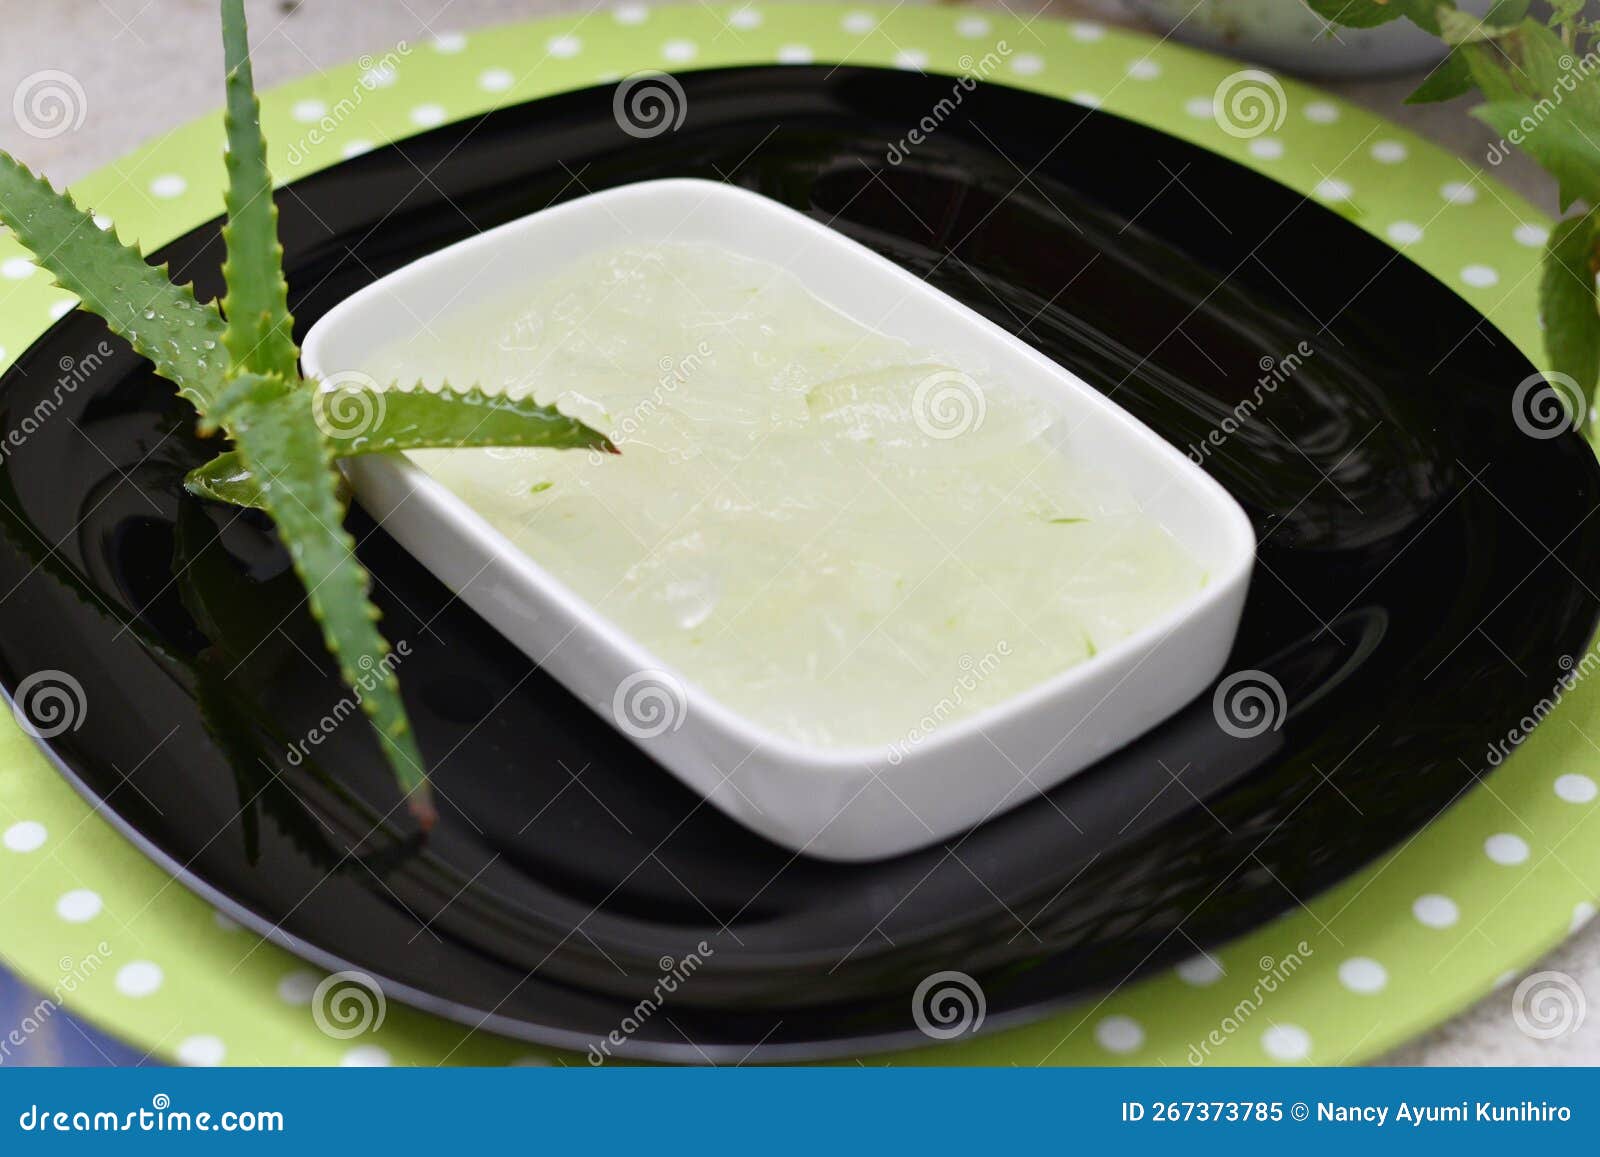 juice extracted from aloe vera leaves